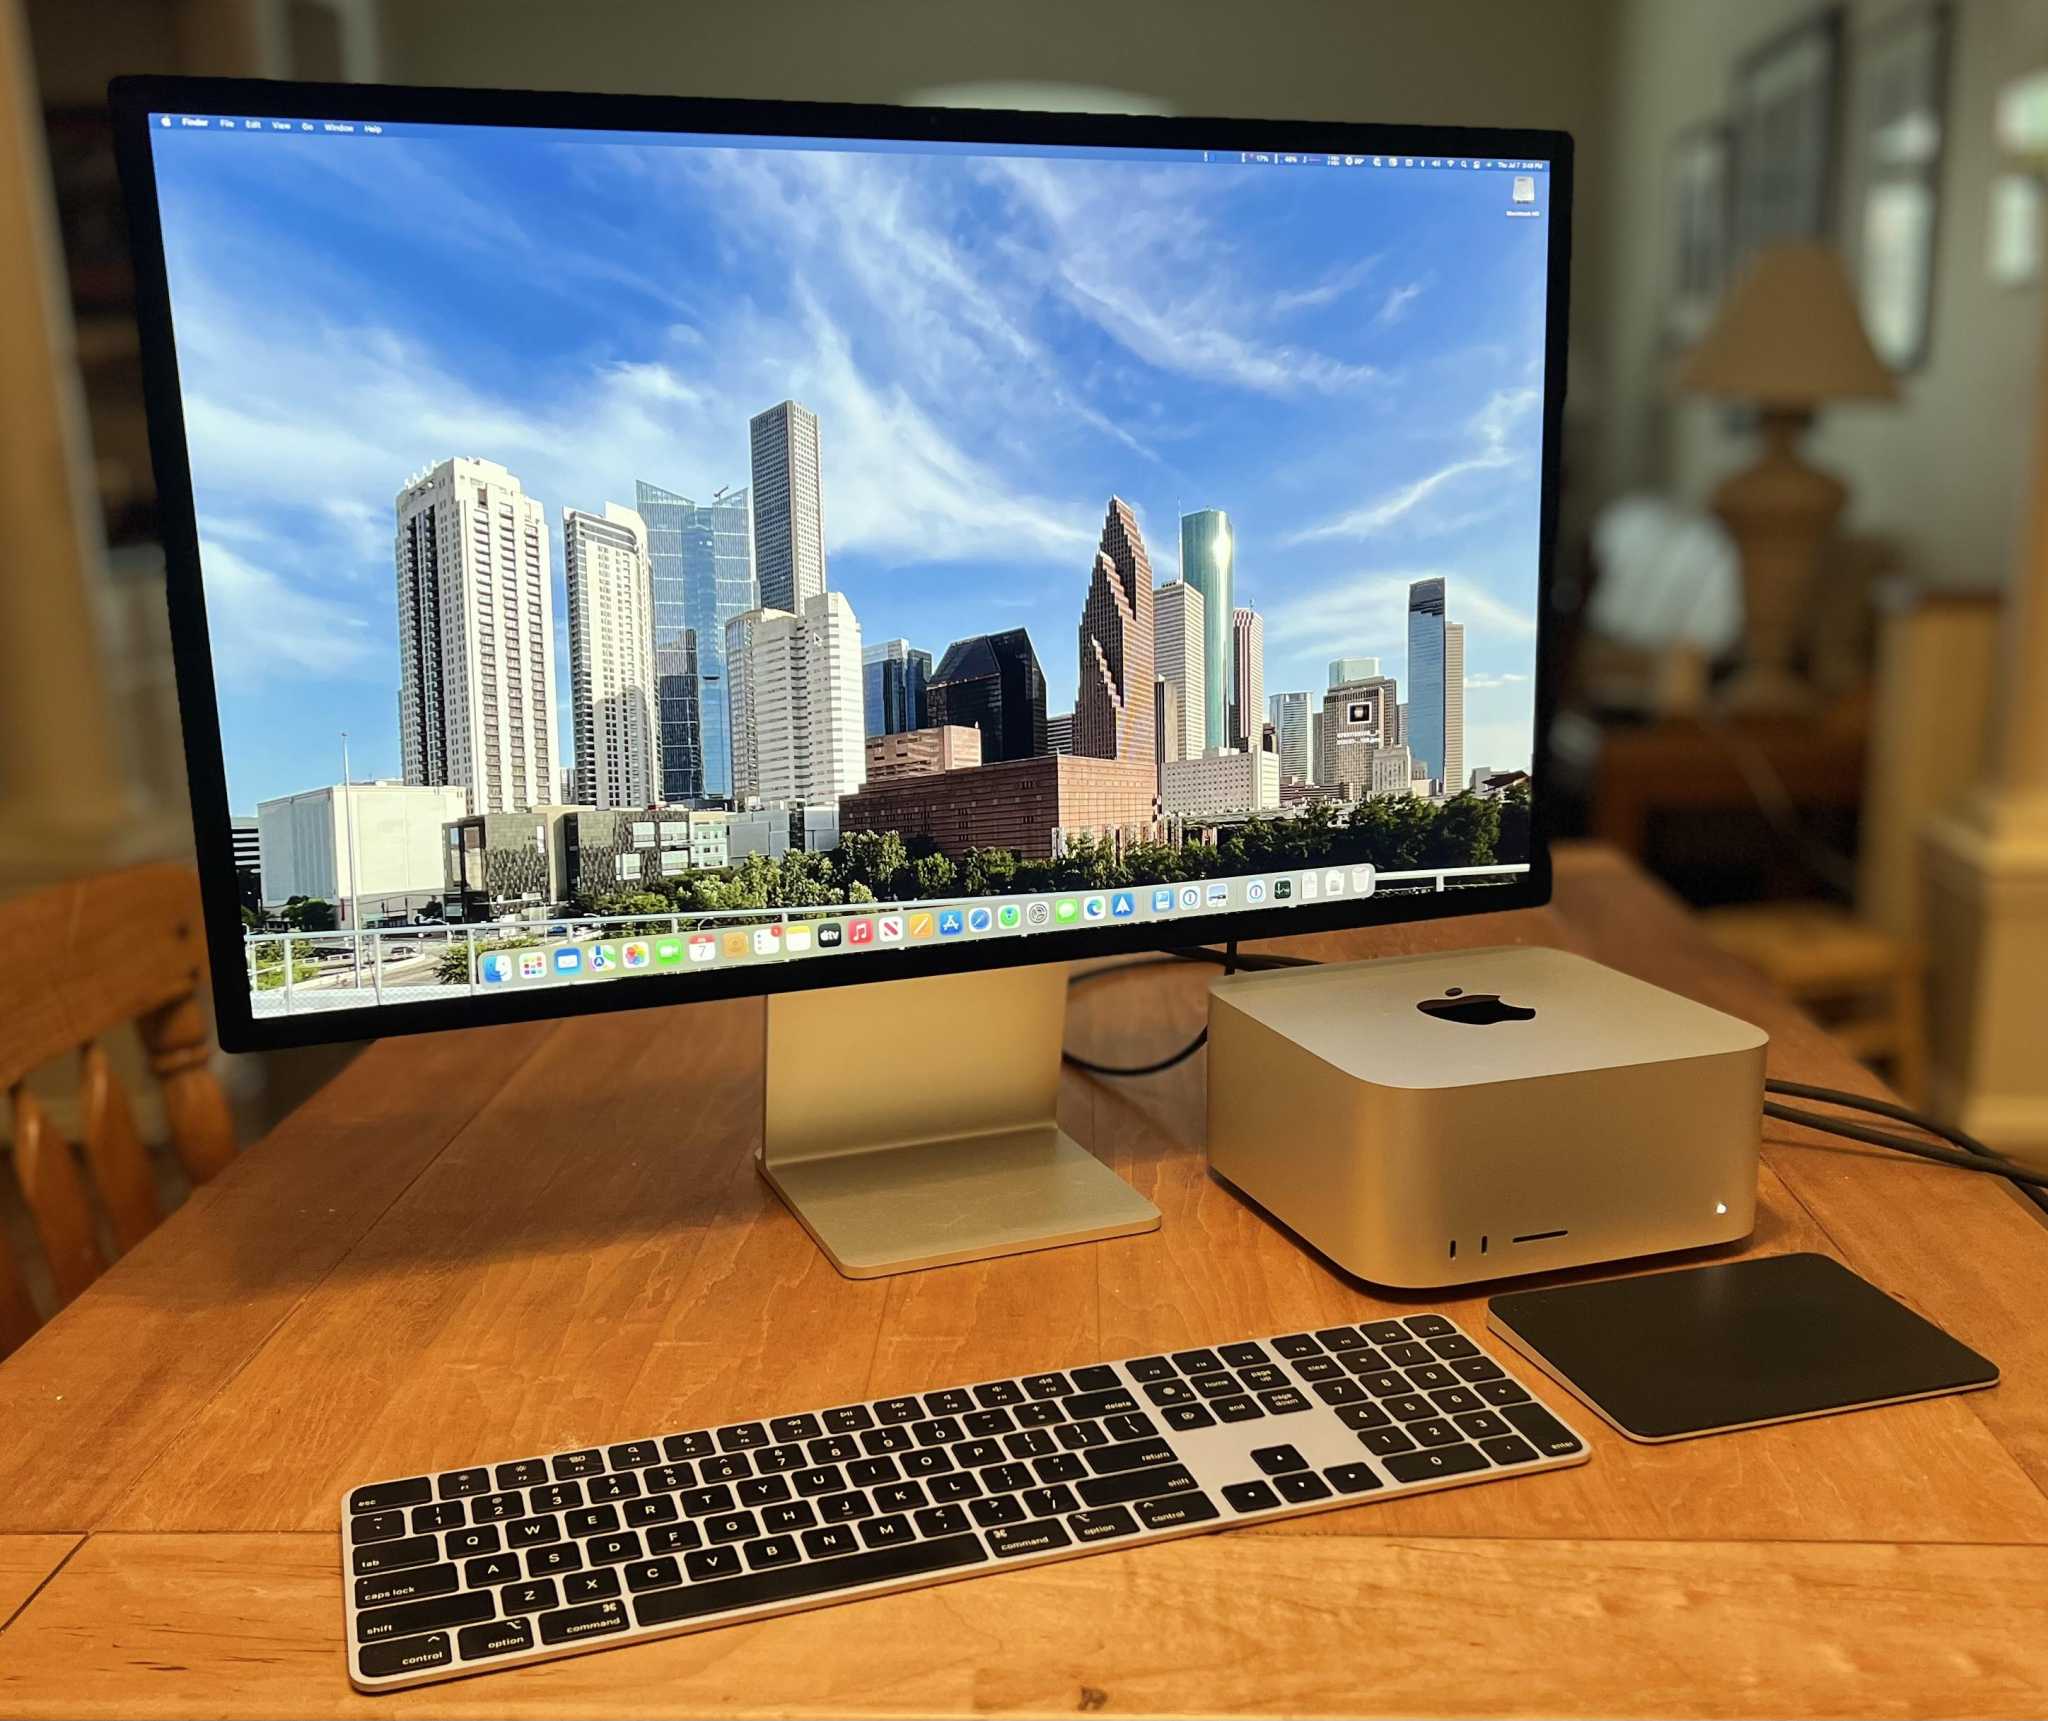 The Mac Studio is efficient, but slower than a PC - Galaxus